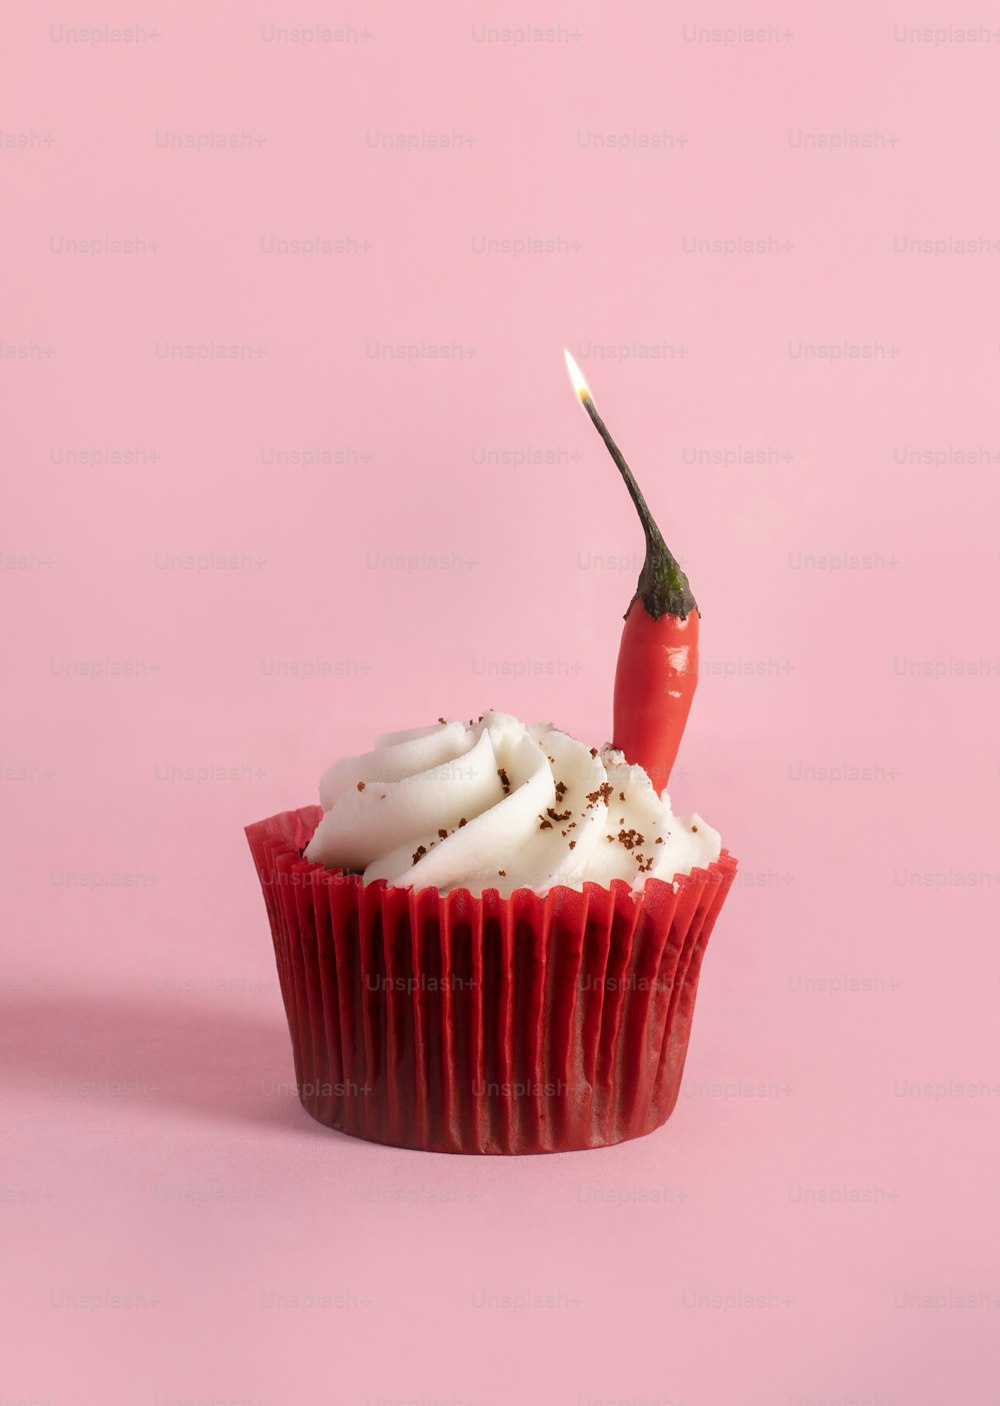 a cupcake with white frosting and a red pepper on top